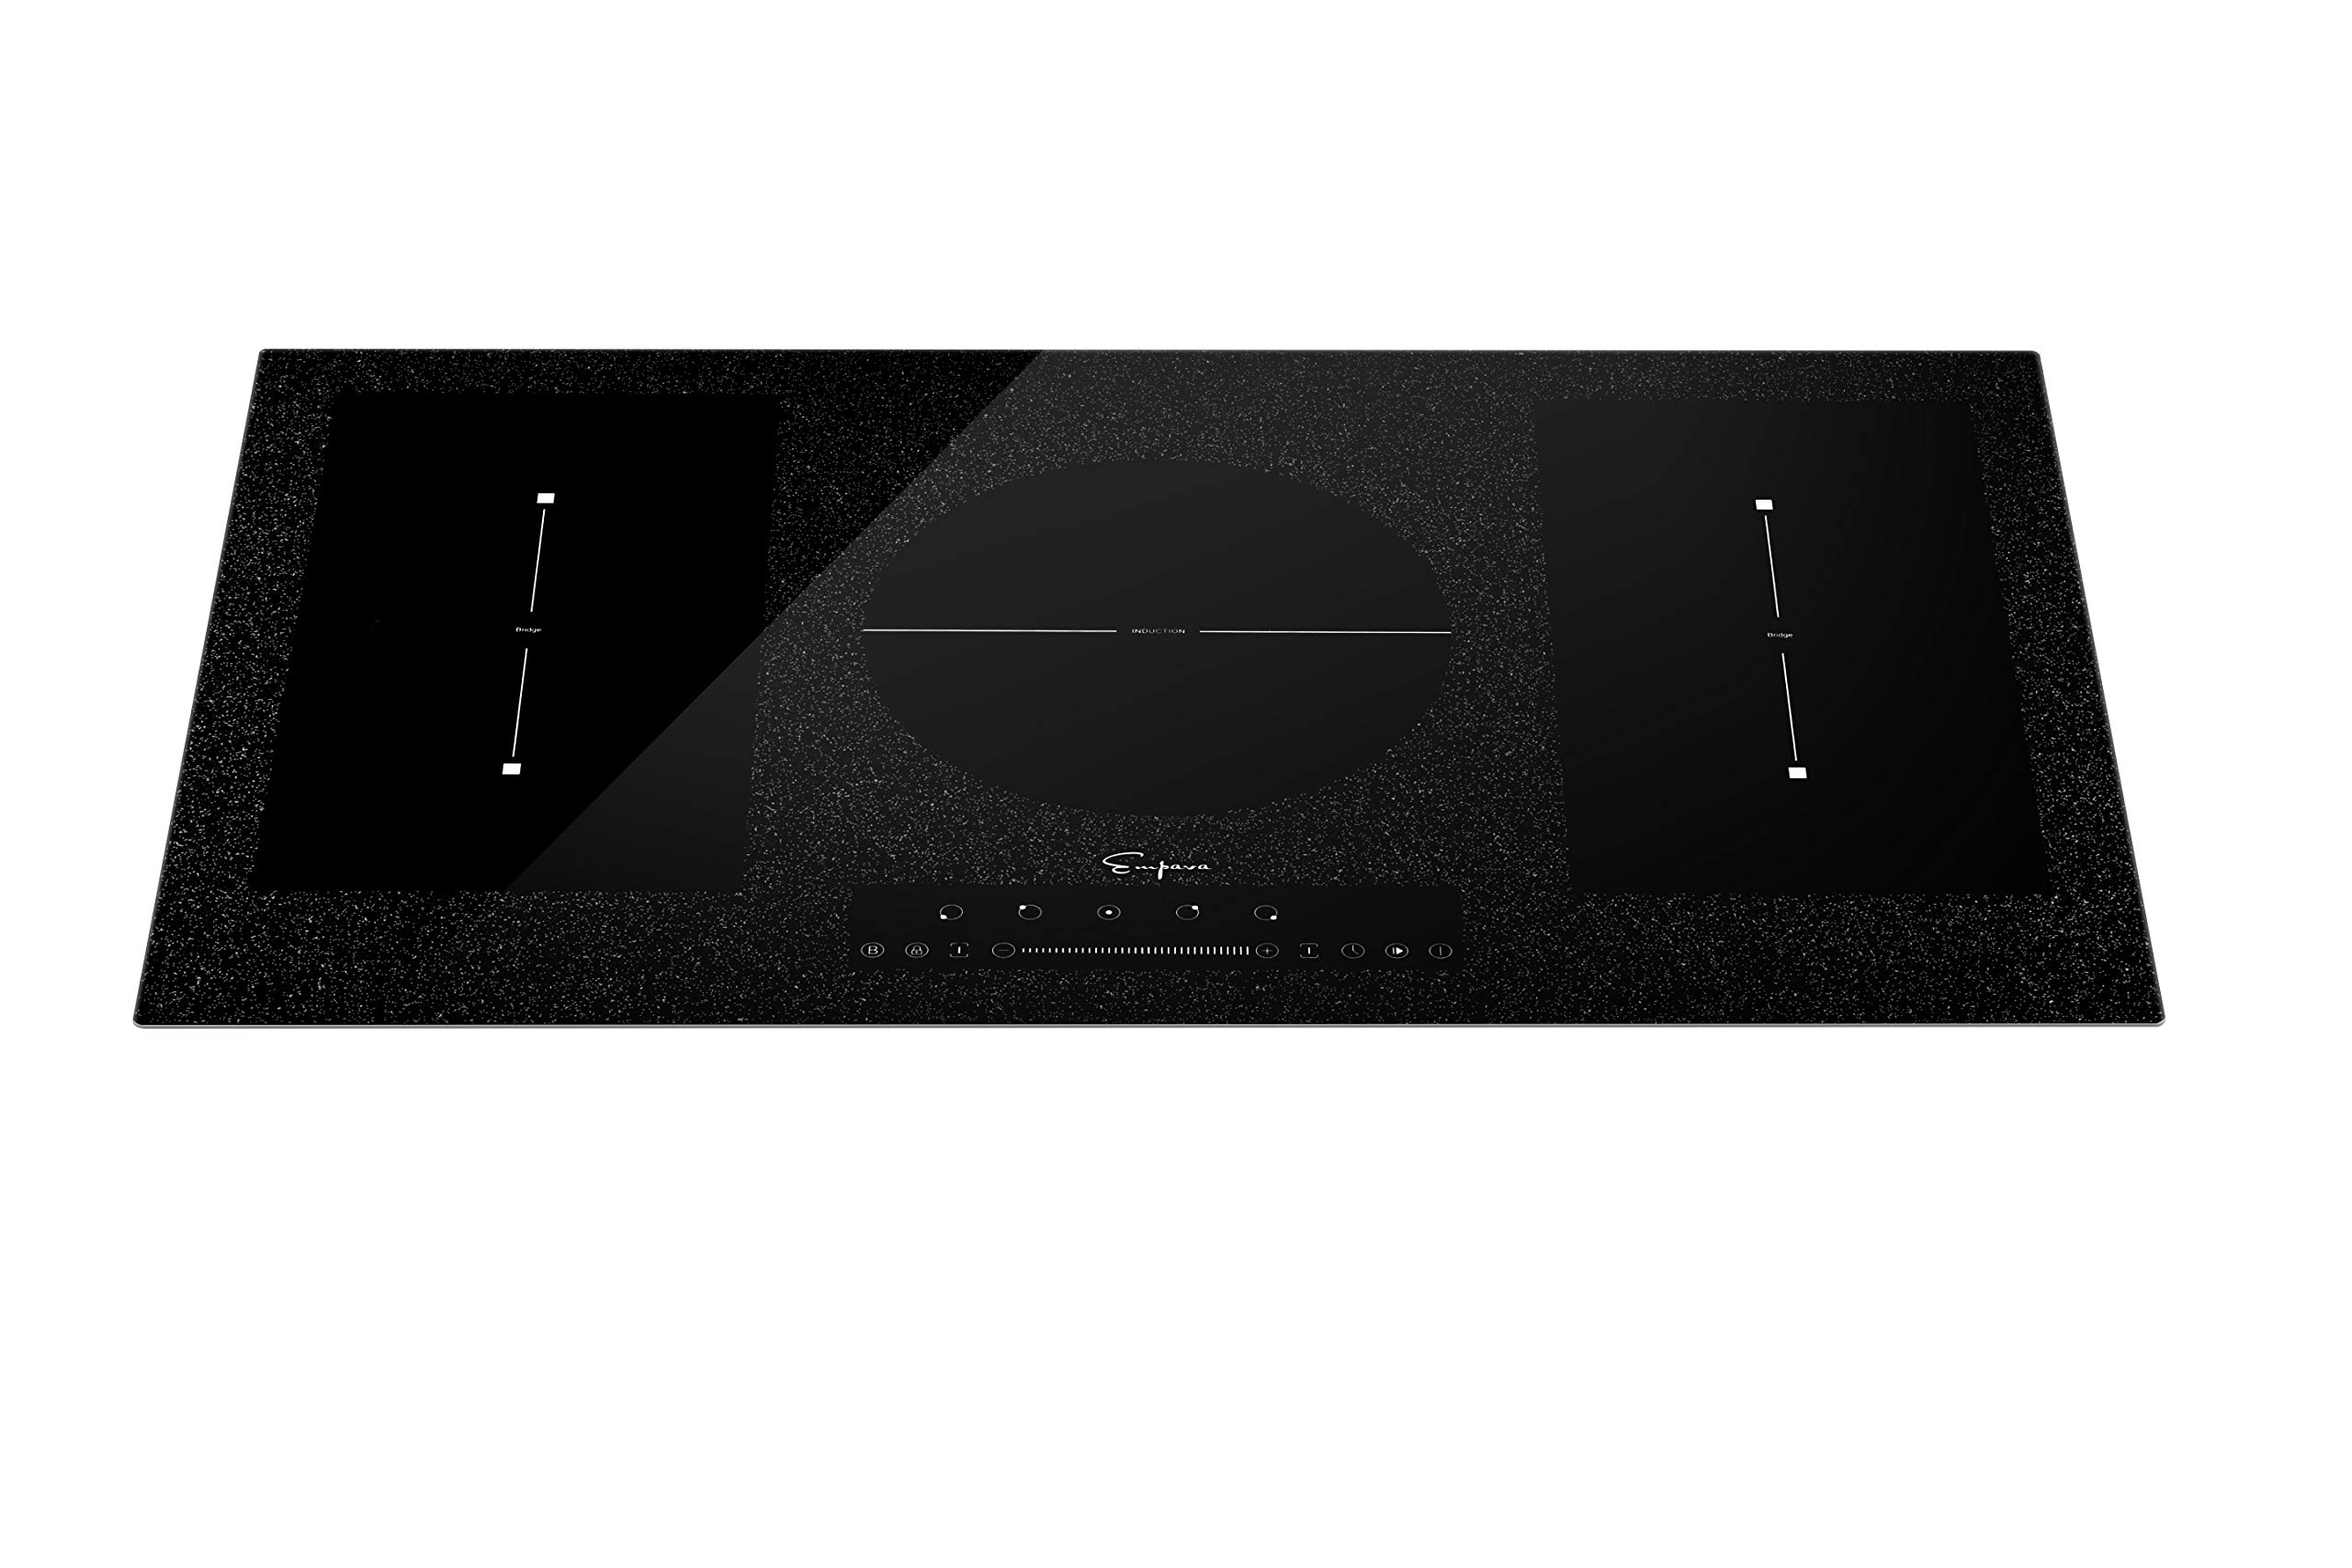 Empava 36 in Electric Stove Induction Cooktop with 5 Booster Burners Including 2 Flexi Bridge Element Smooth Surface in Black, 36 inches